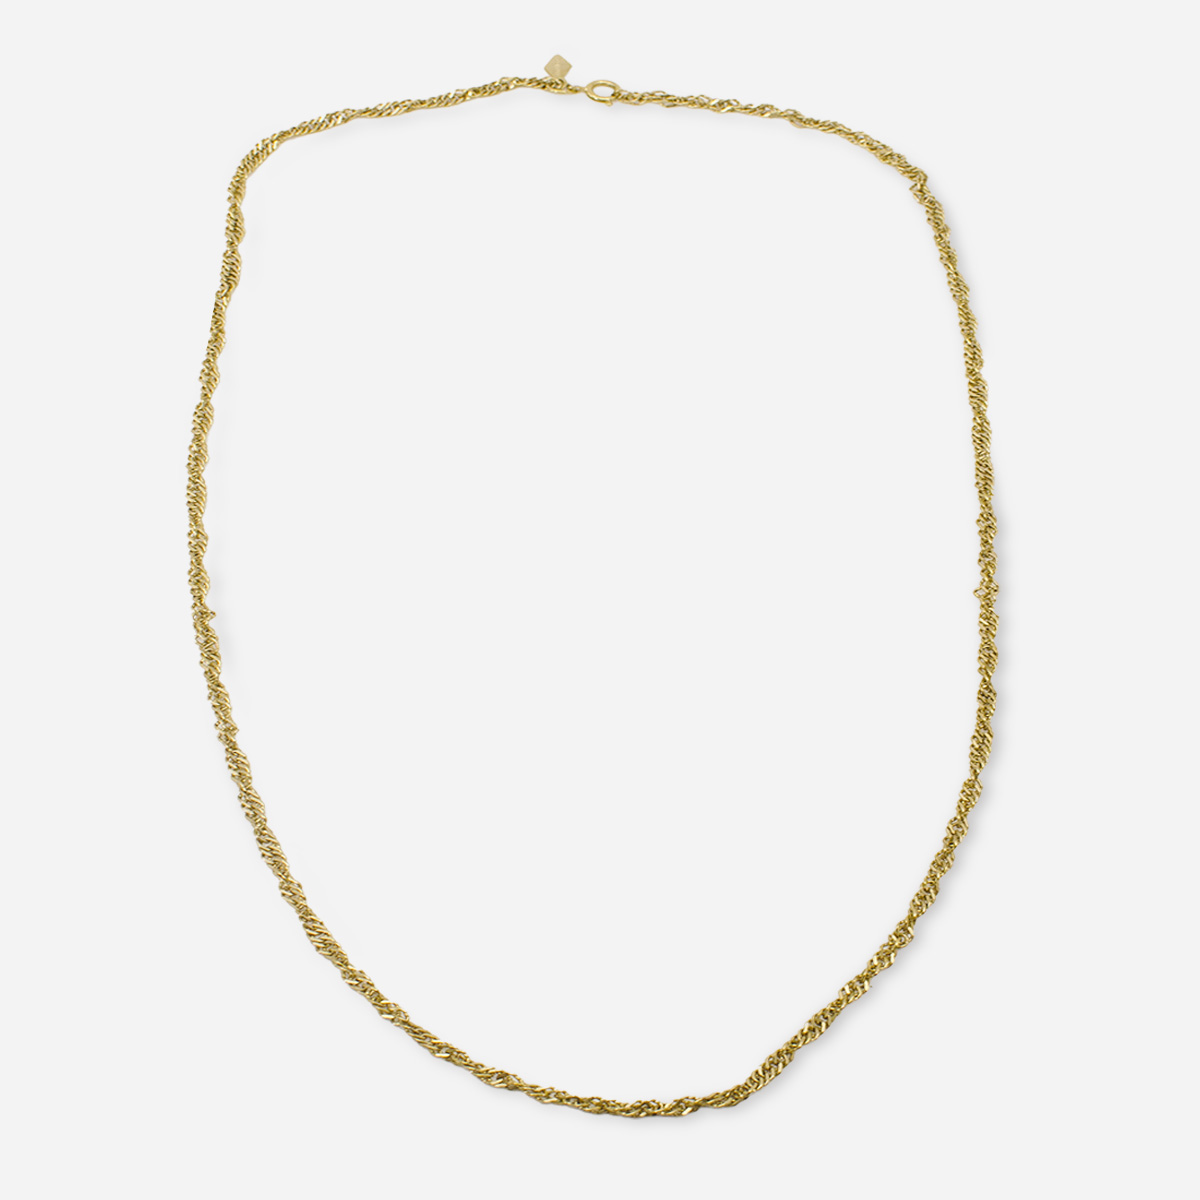 Sarah Coventry gold necklace